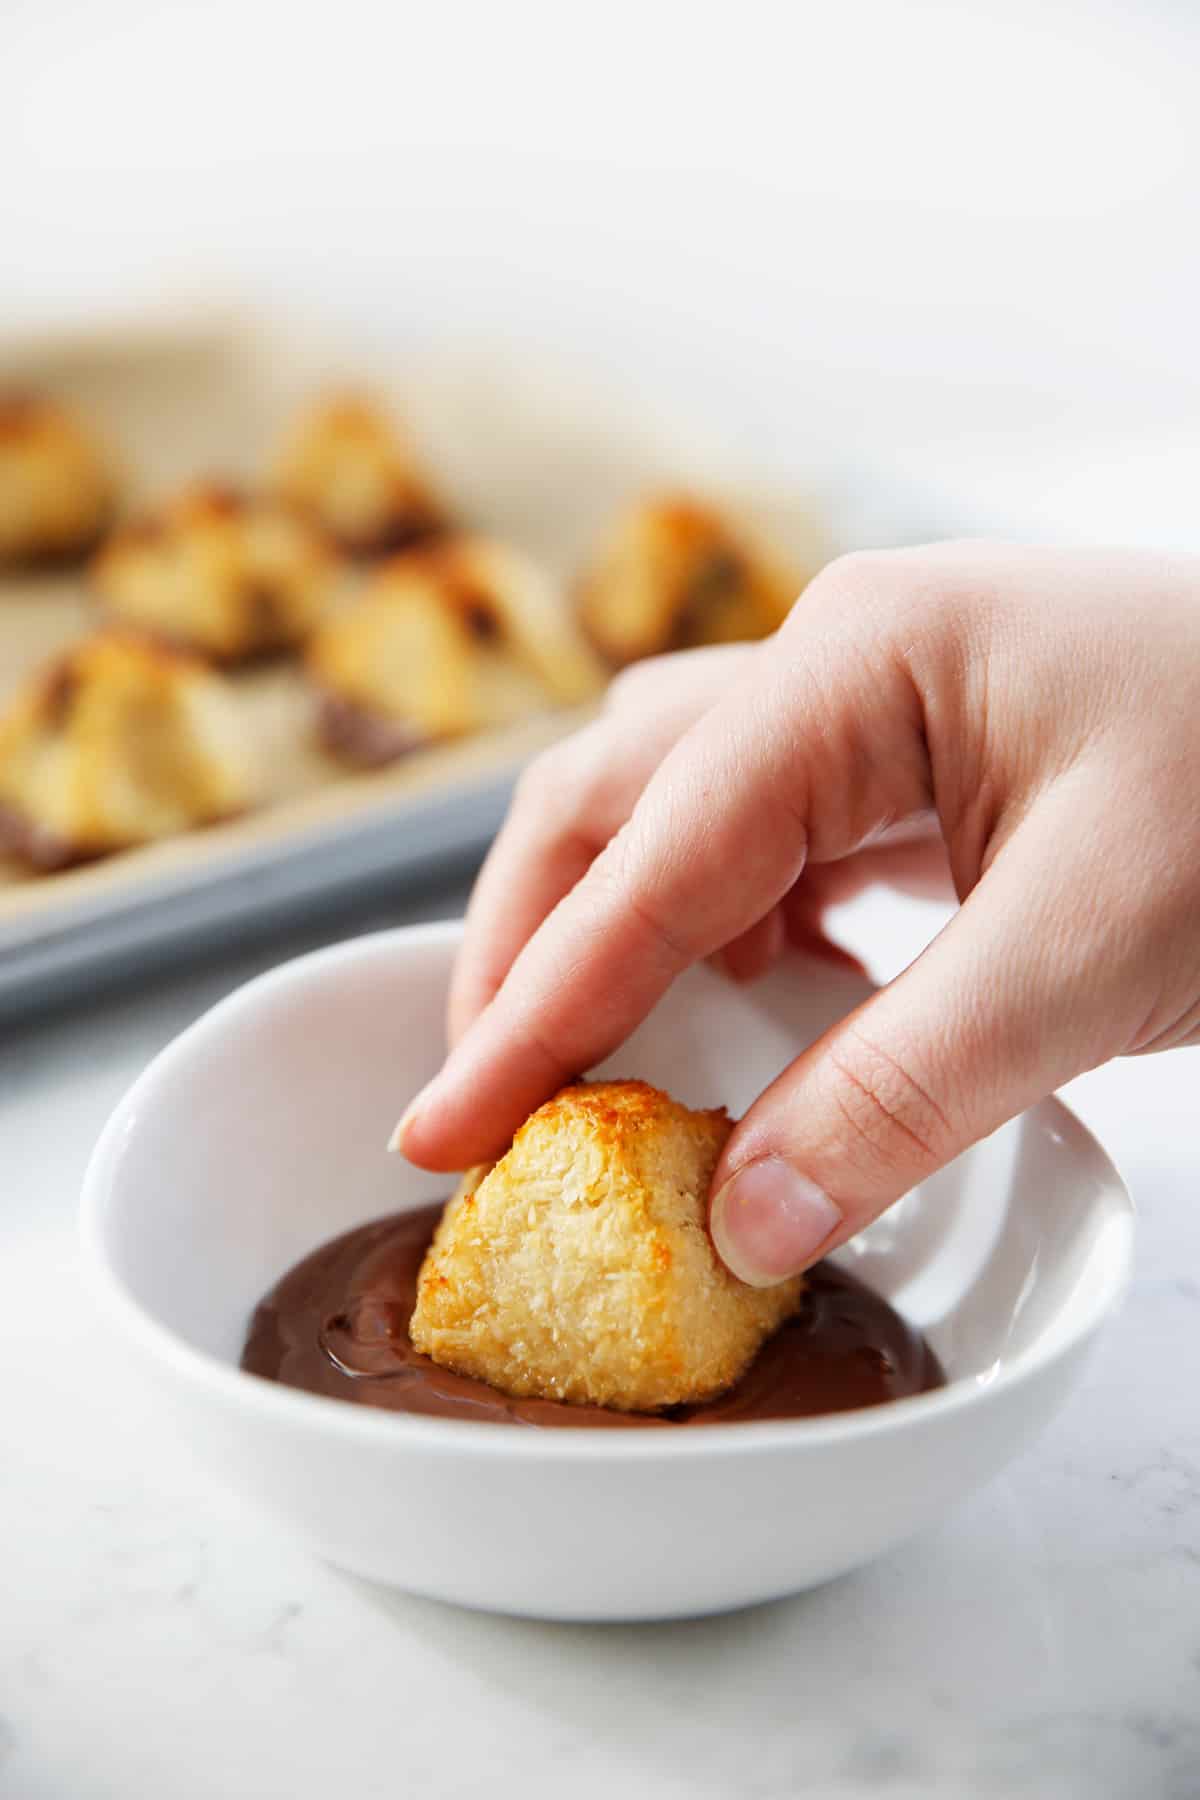 Dipping coconut macaroon in melted chocolate.